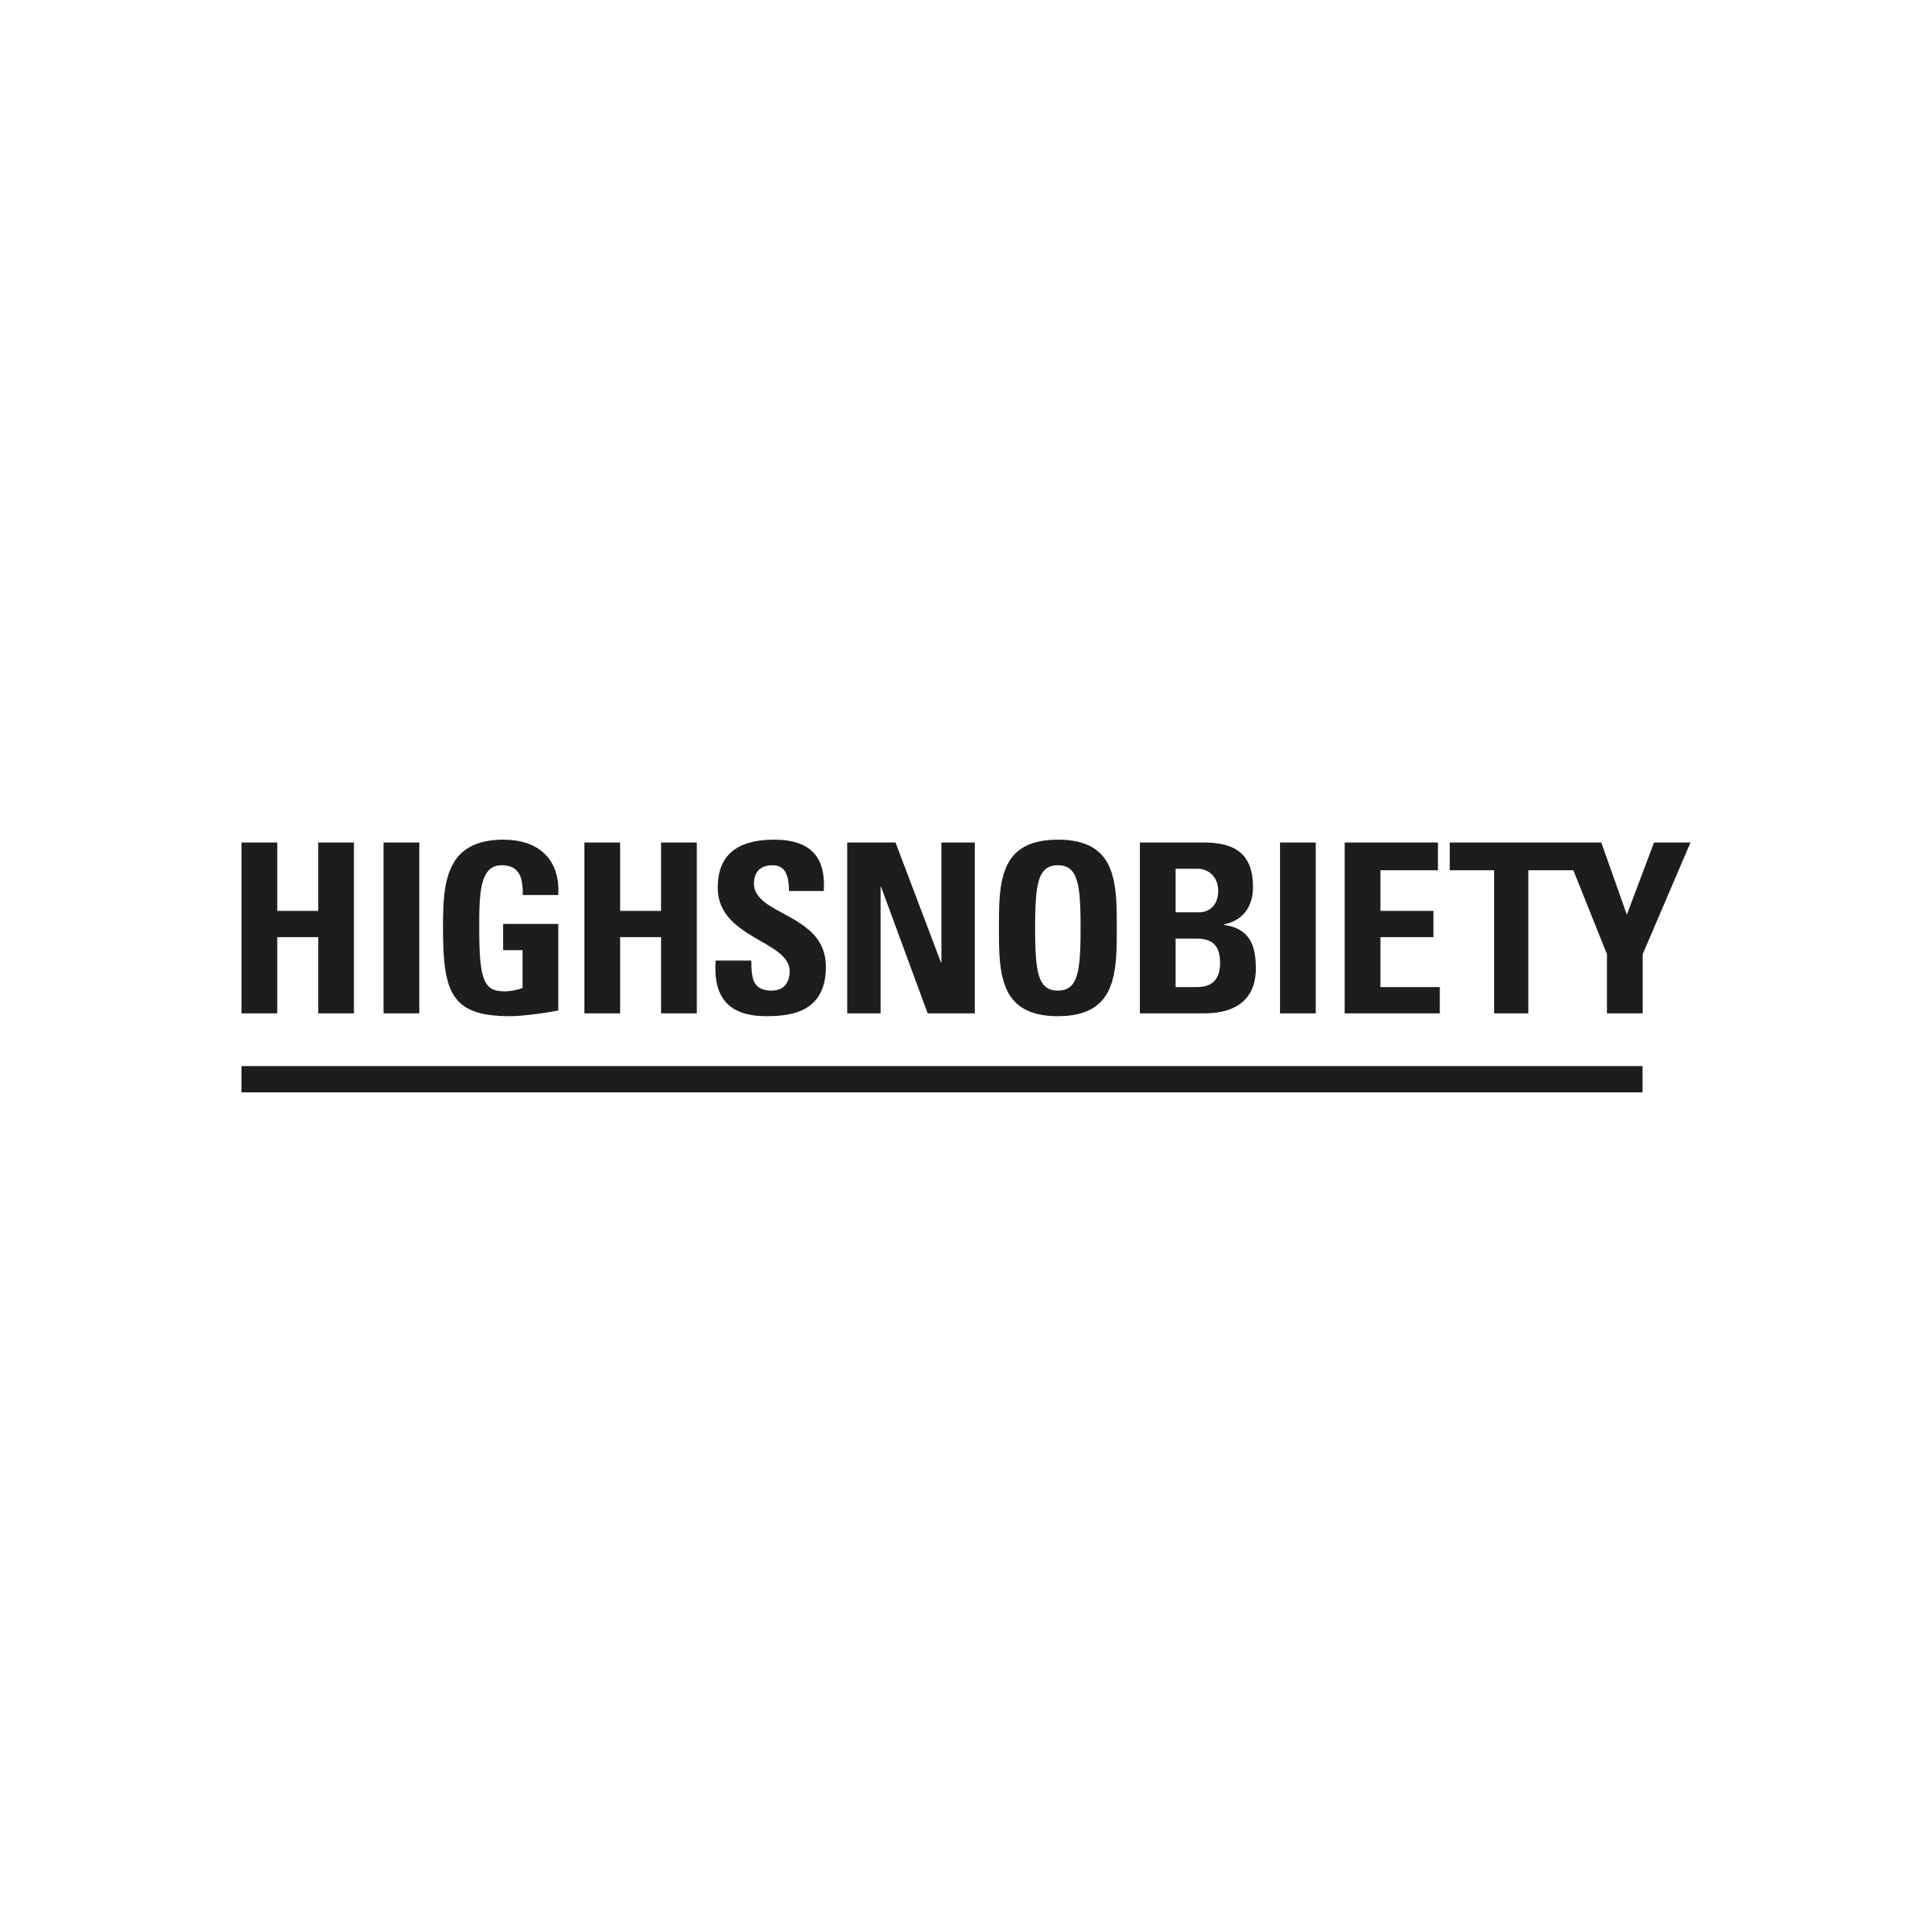 Hypebeast Transparent Logo - Highsnobiety. Online lifestyle news site covering sneakers